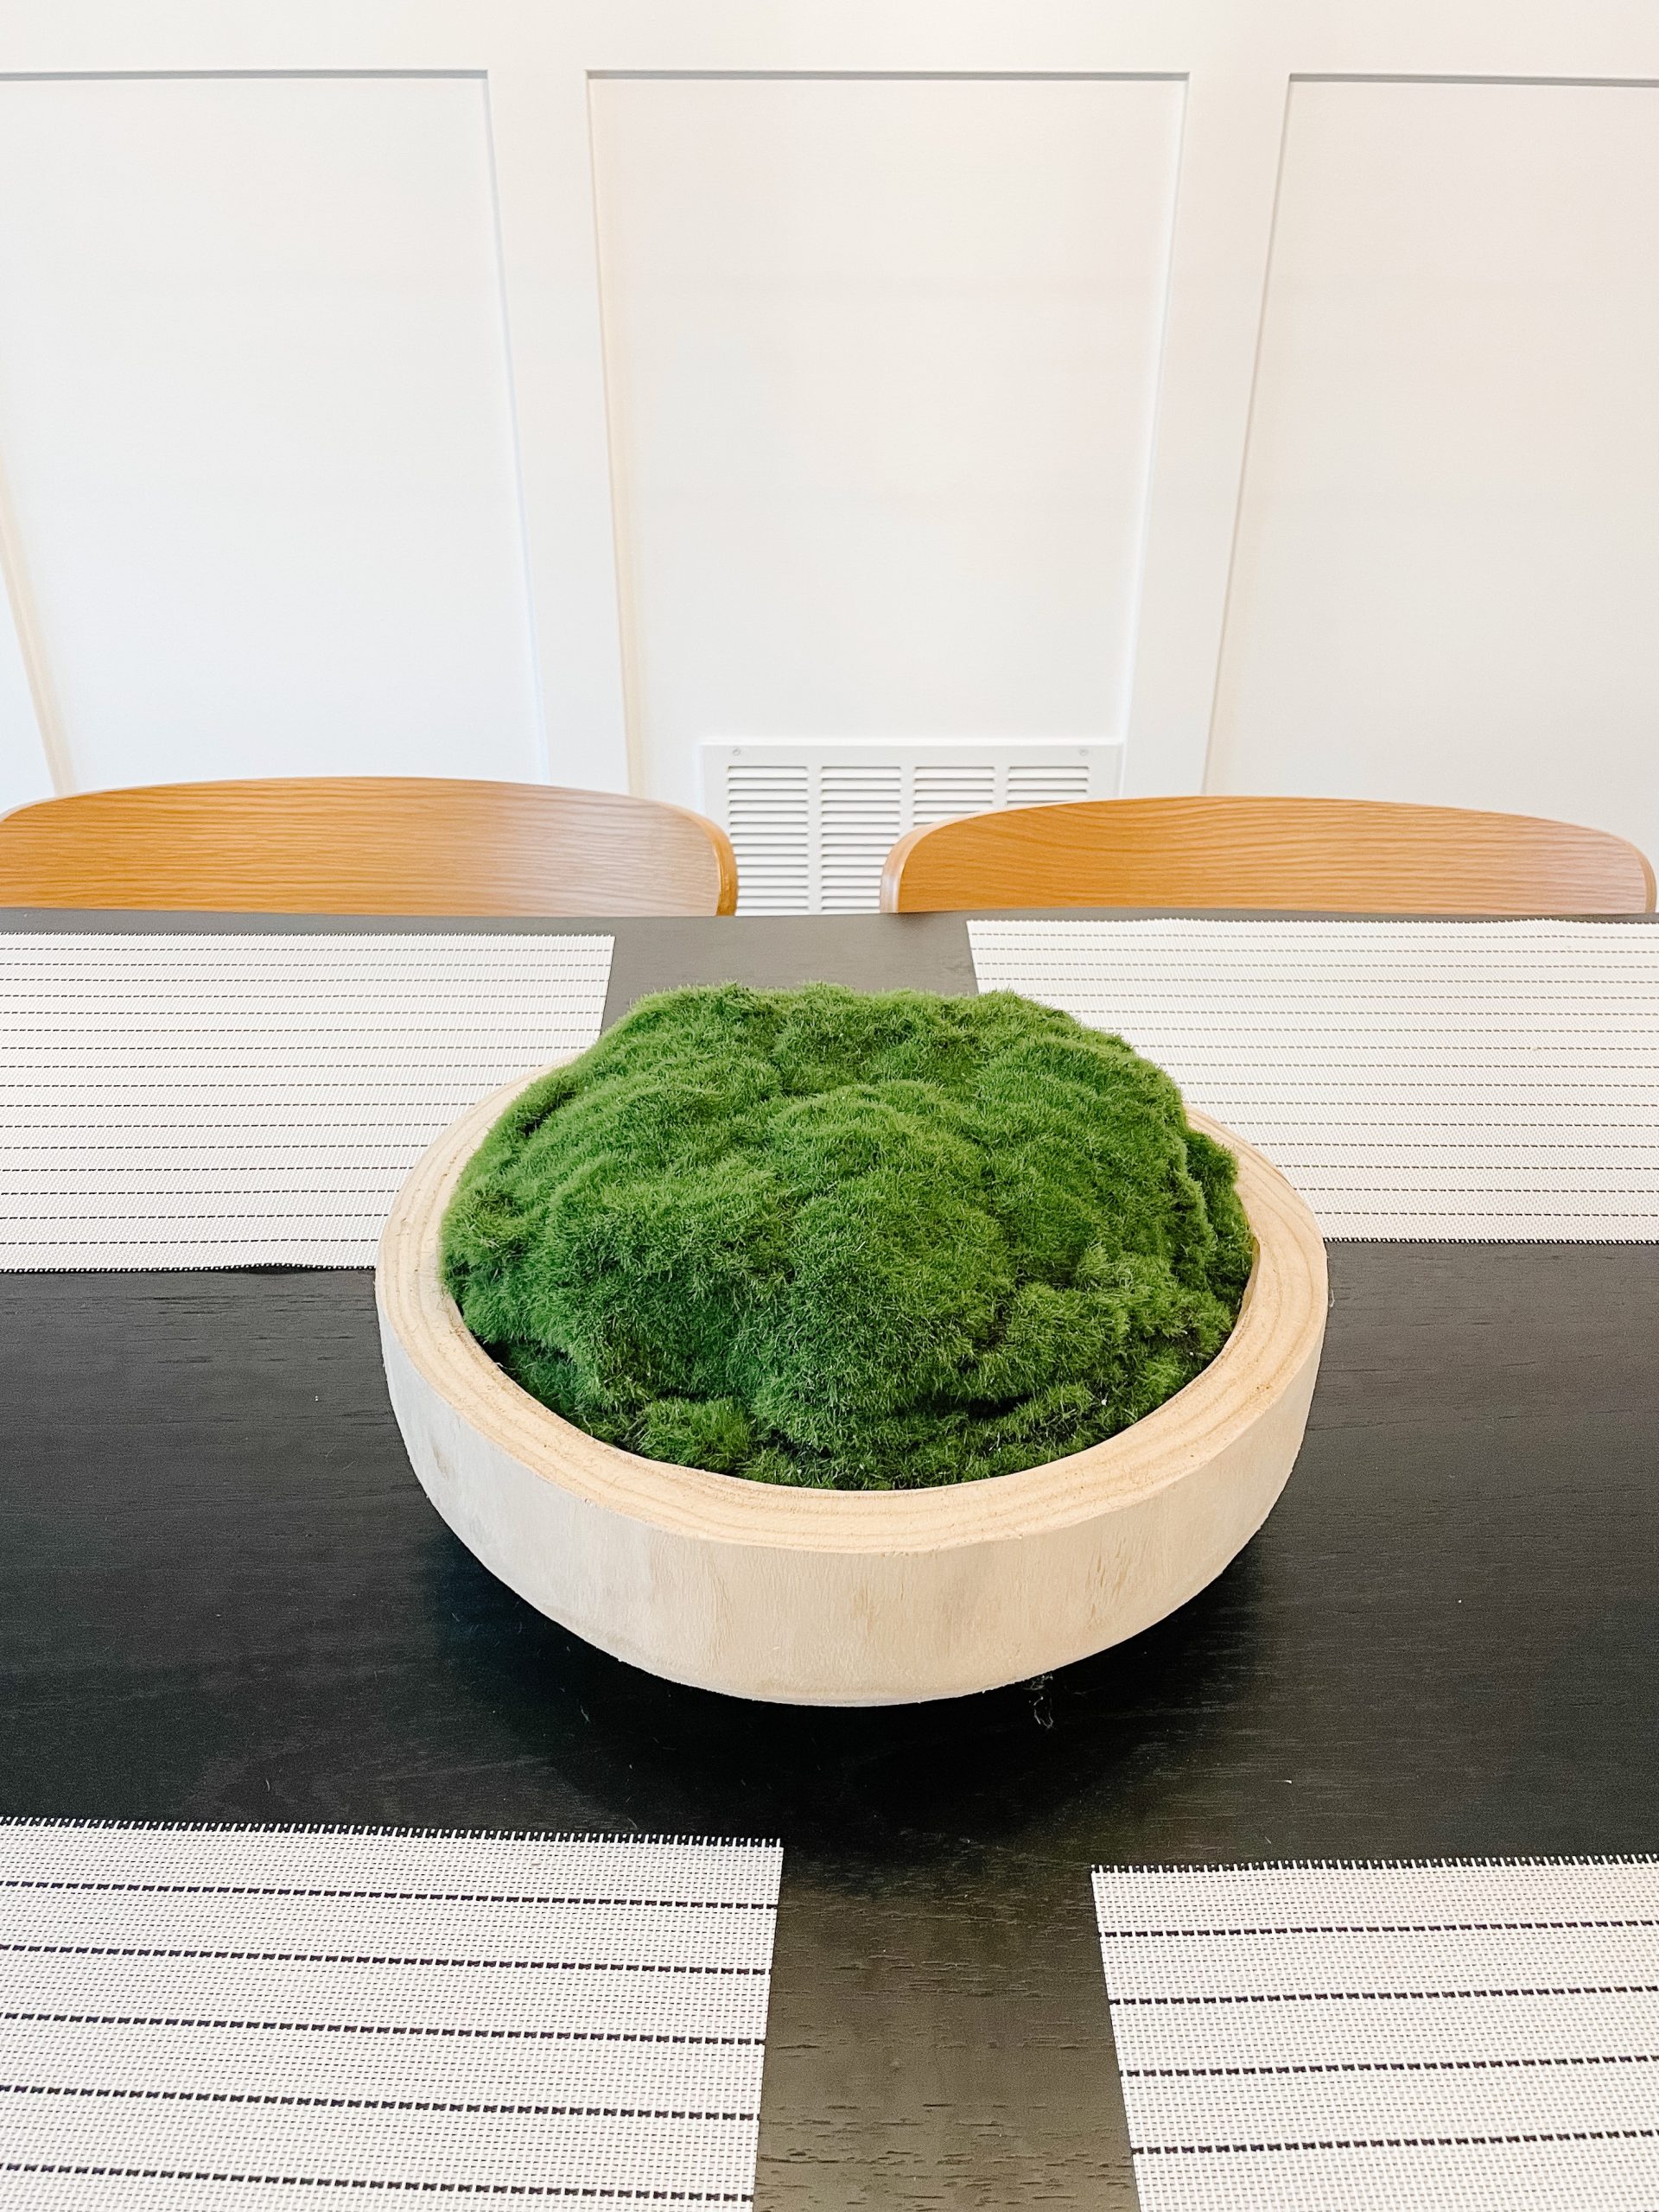 X-tra Large Moss Centerpiece for Table Moss Bowl Arrangement for